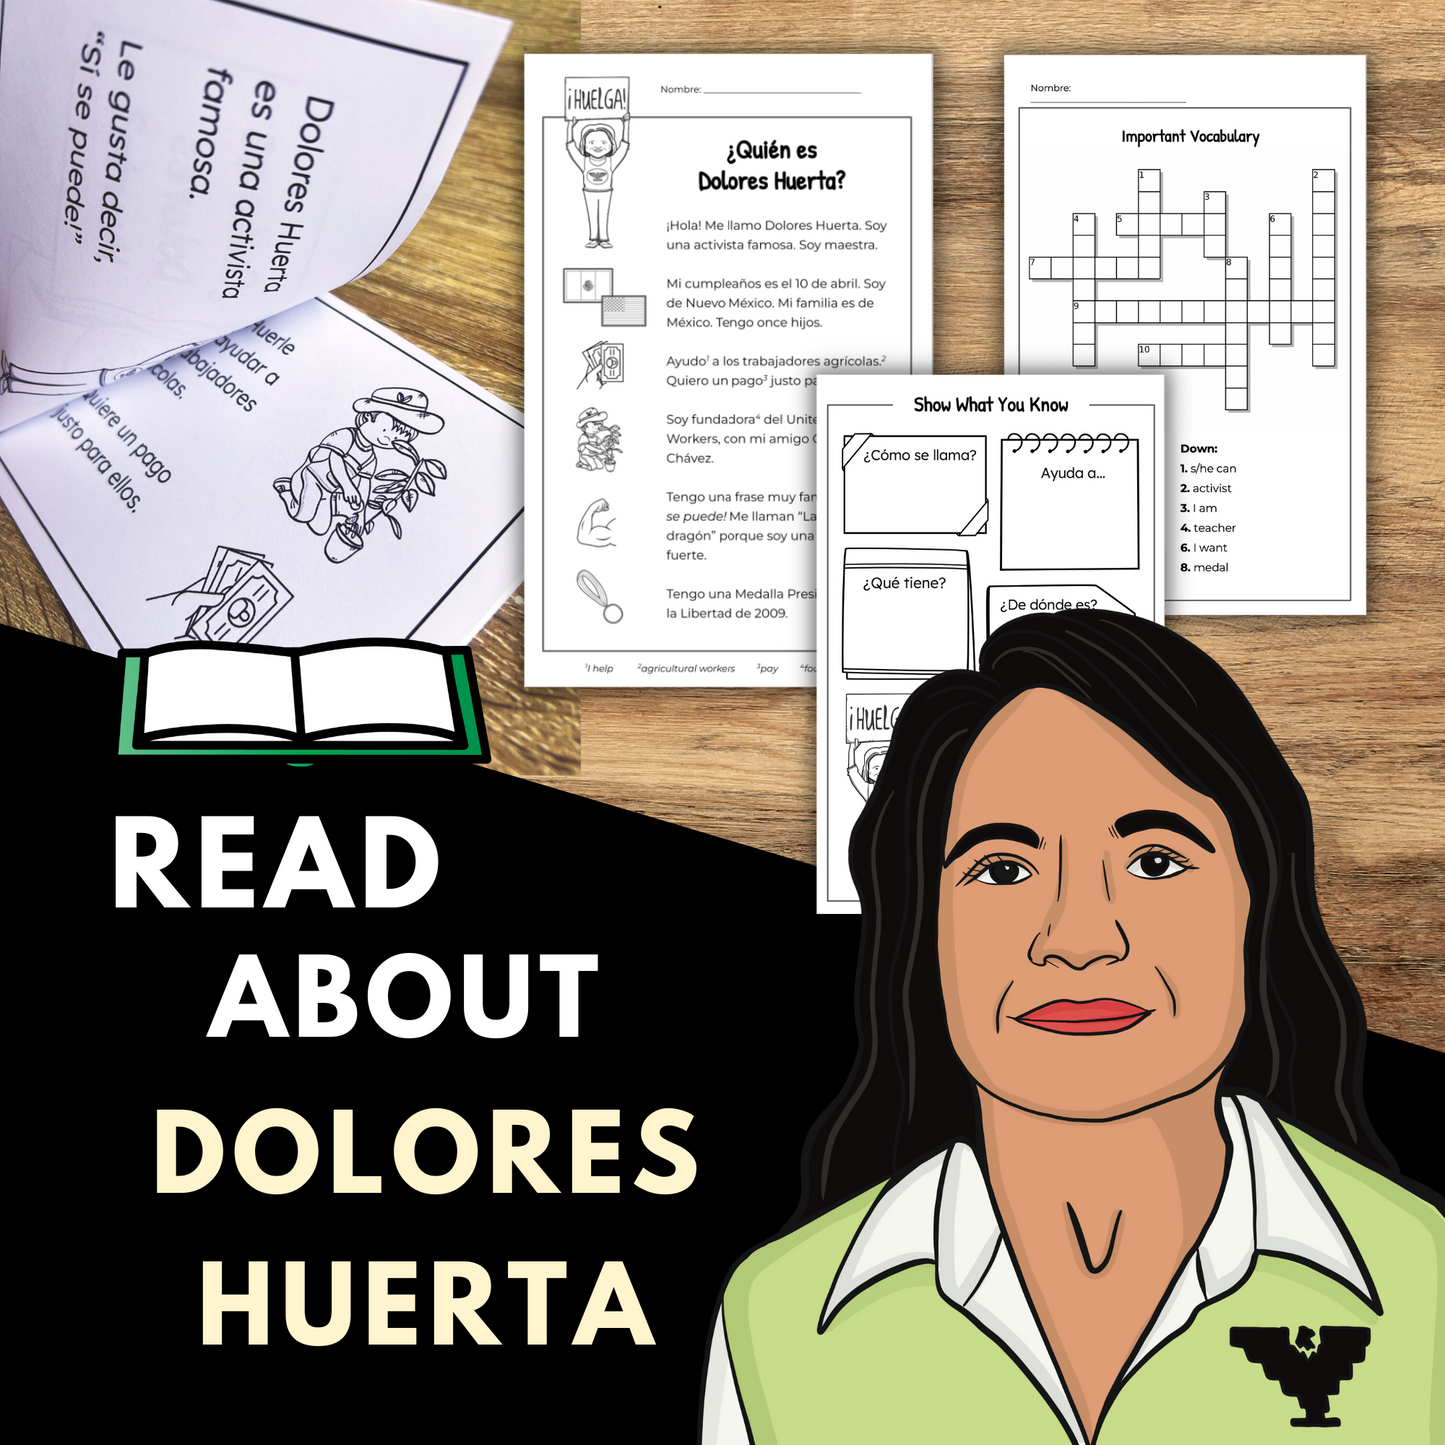 Dolores Huerta Mini-Book, Text, and Activities in Spanish and English